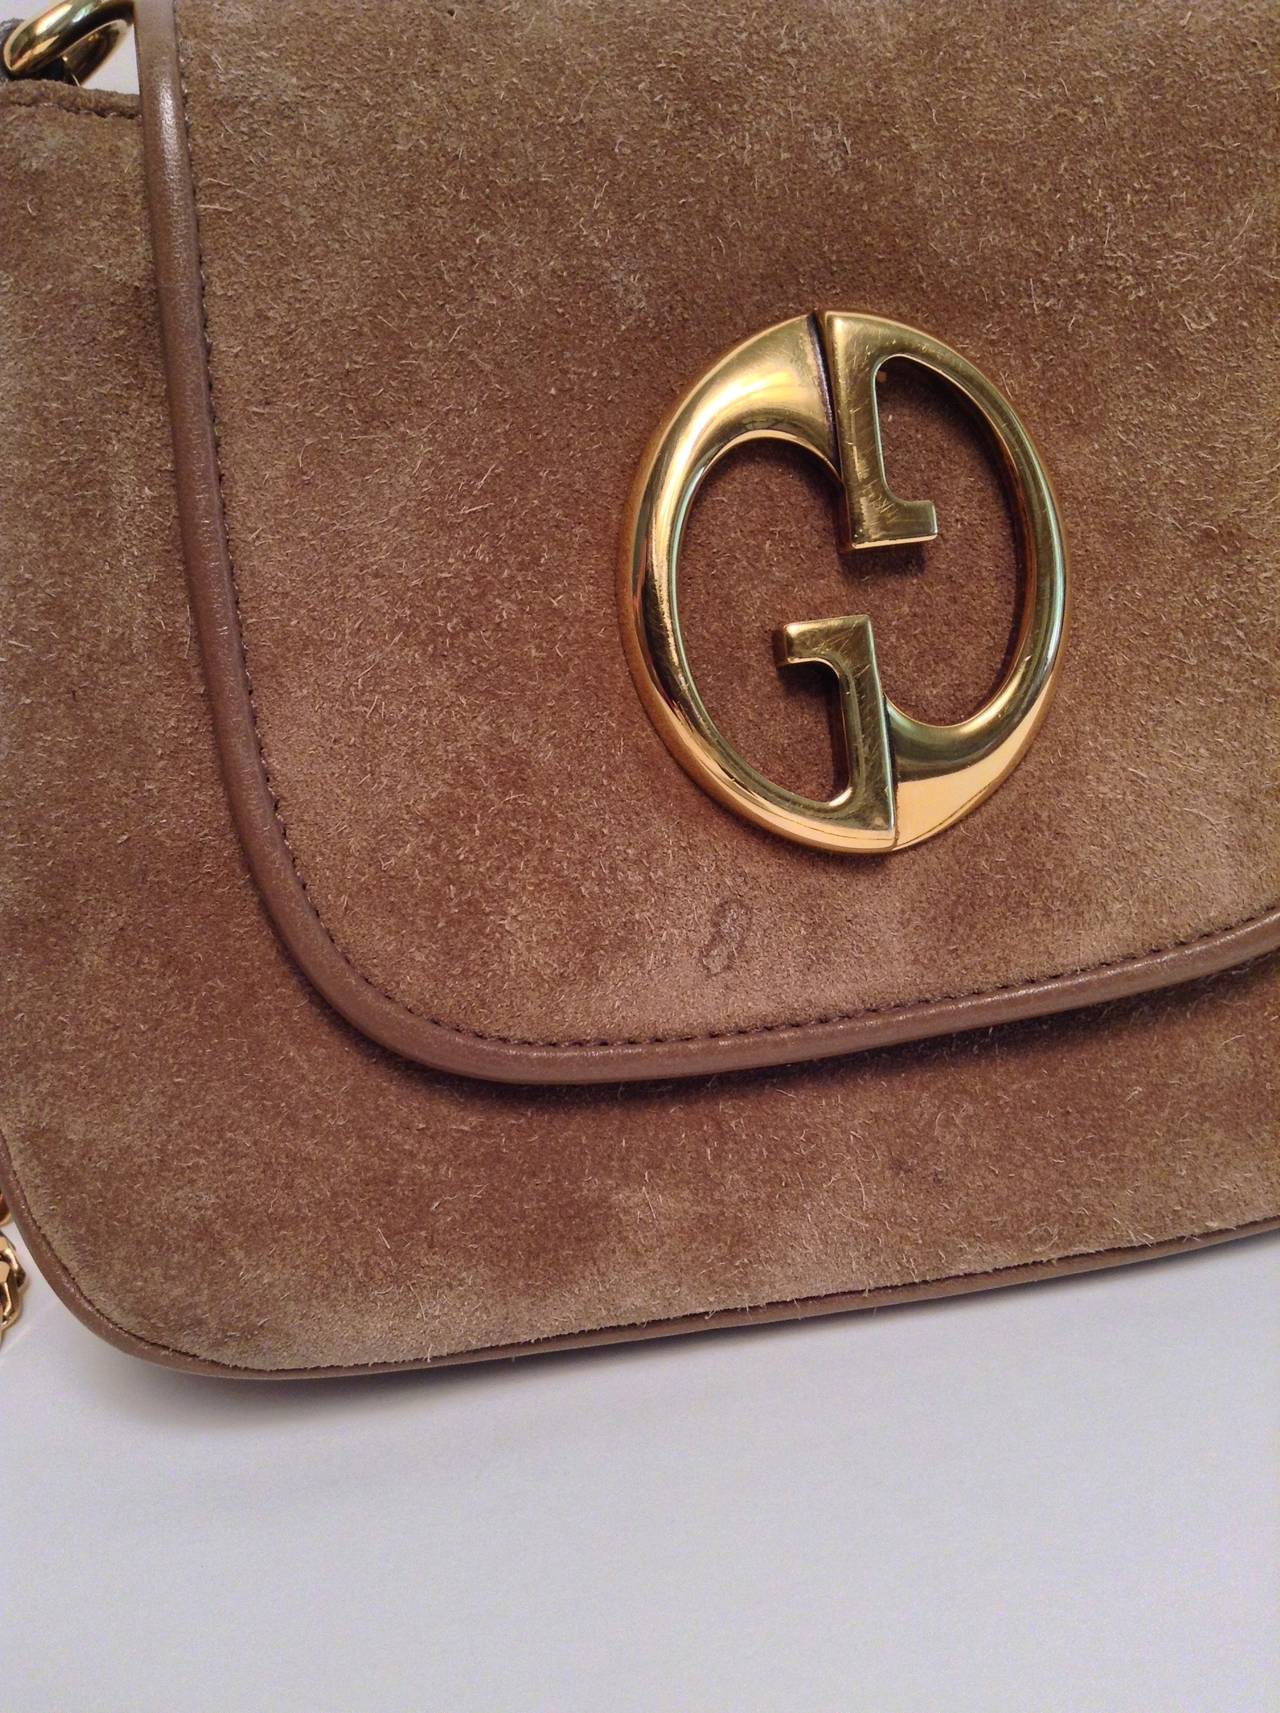 Gucci Taupe Suede Gold Chain Bag 1973 Reissue 5